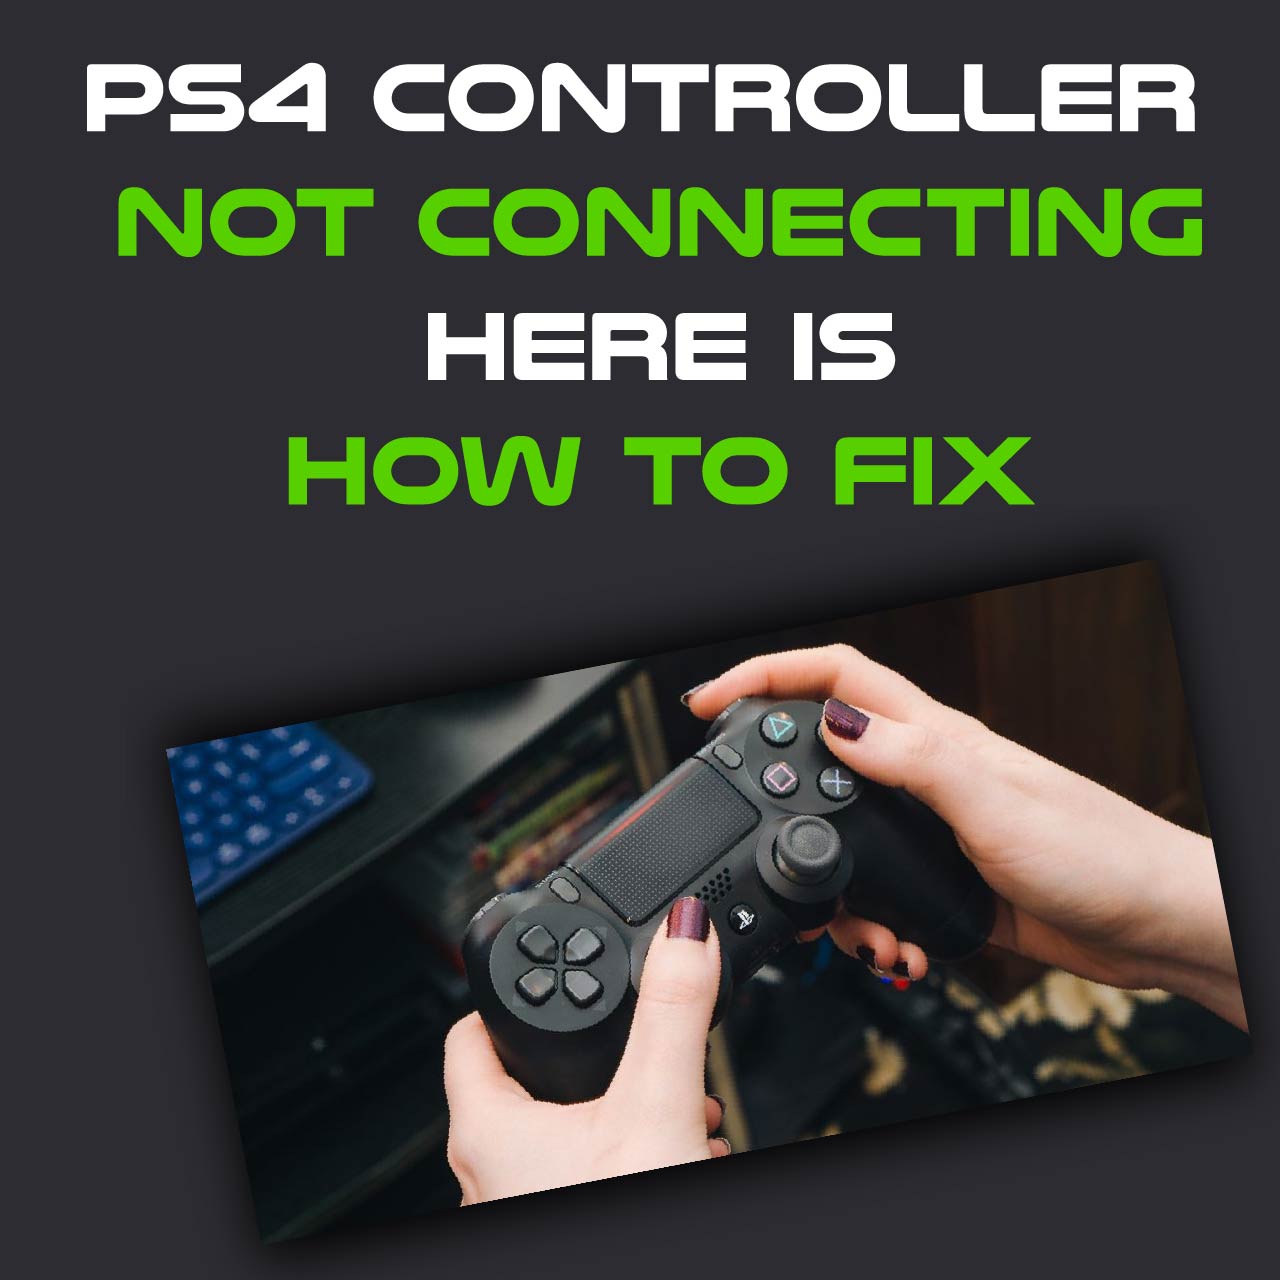 PS4 Controller Not Connecting? Here is How to Fix